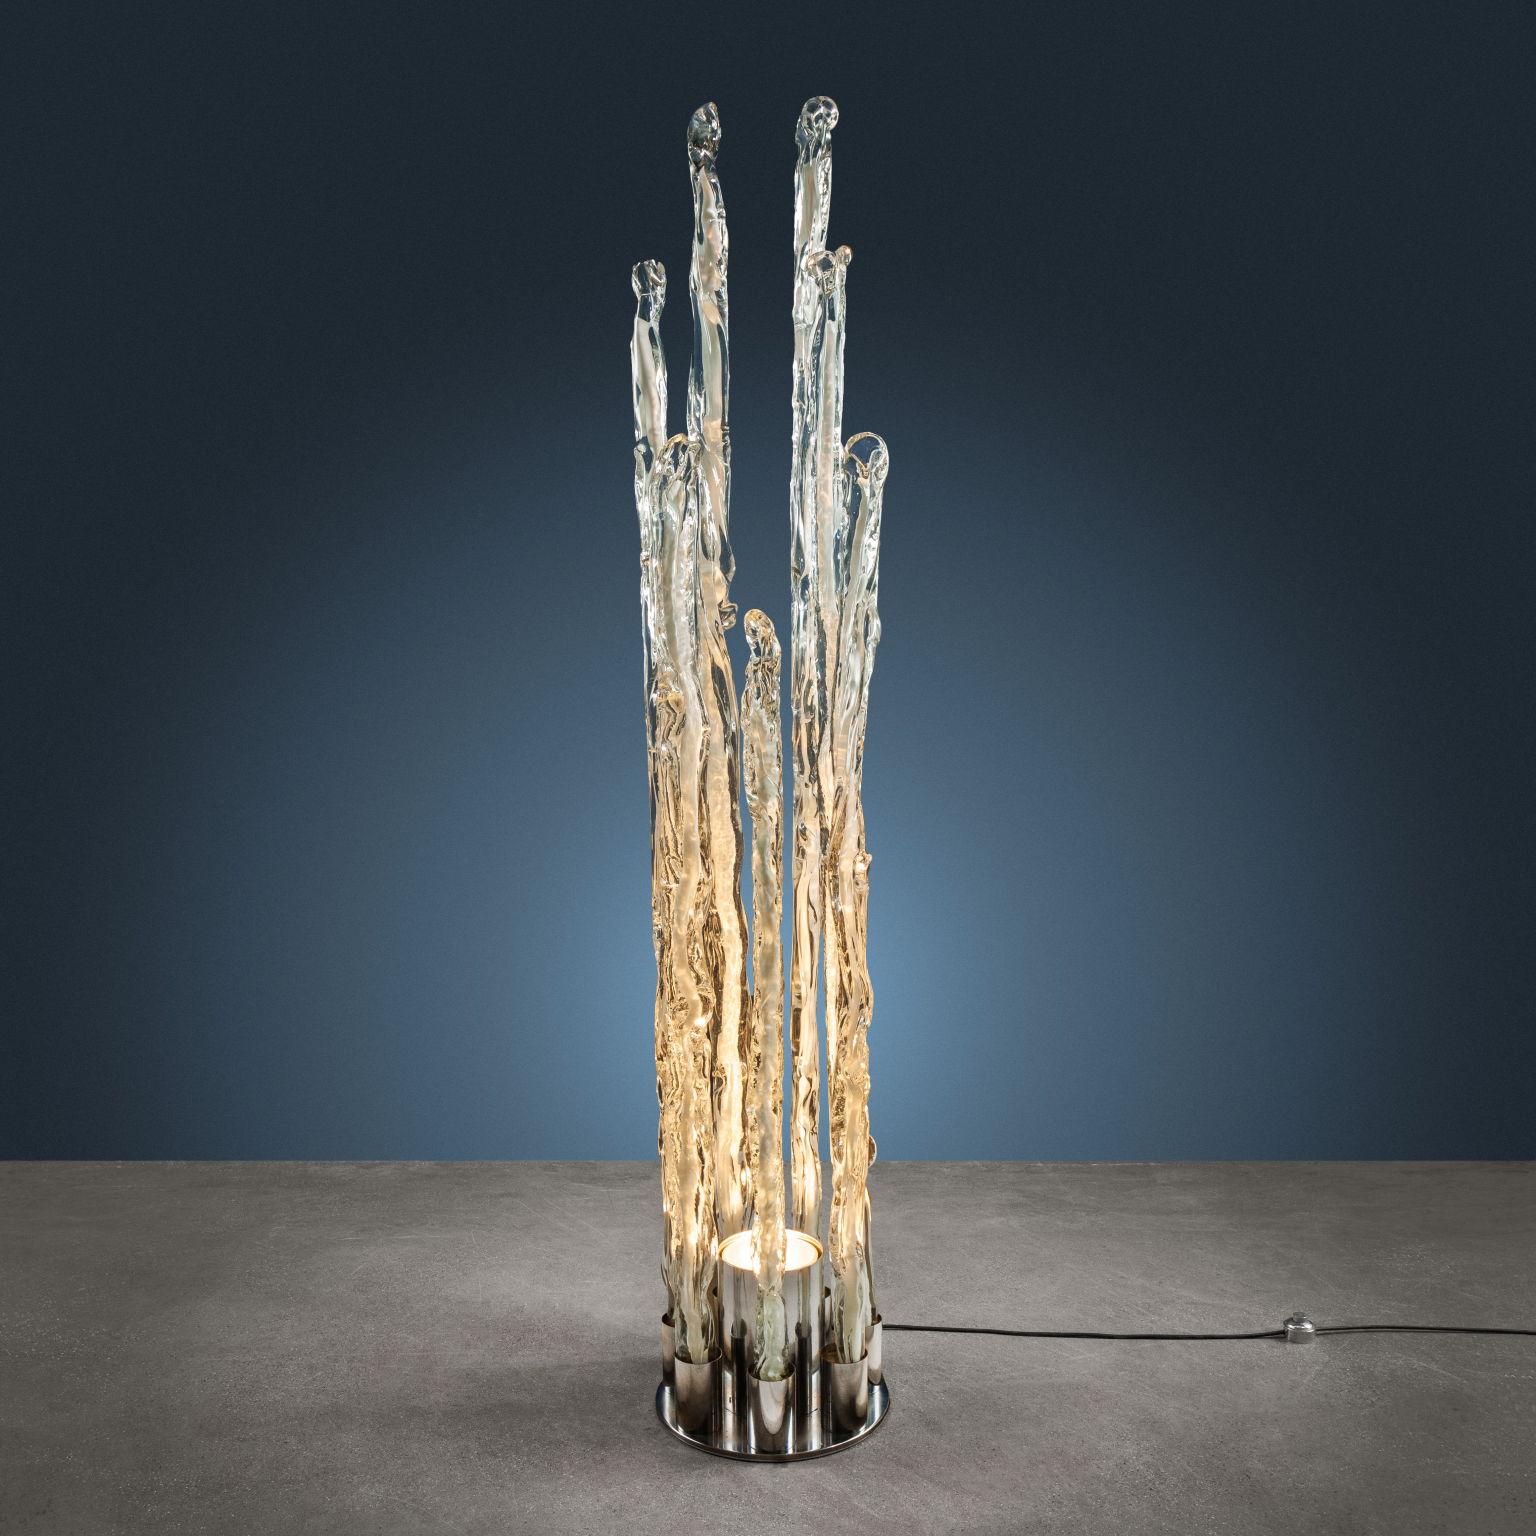 Floor lamp in transparent Murano glass with inclusions of glass paste and base in chromed metal. 'Excalibur' series, designed by Ettore Fantasia and Gino Poli for a Sothis production.